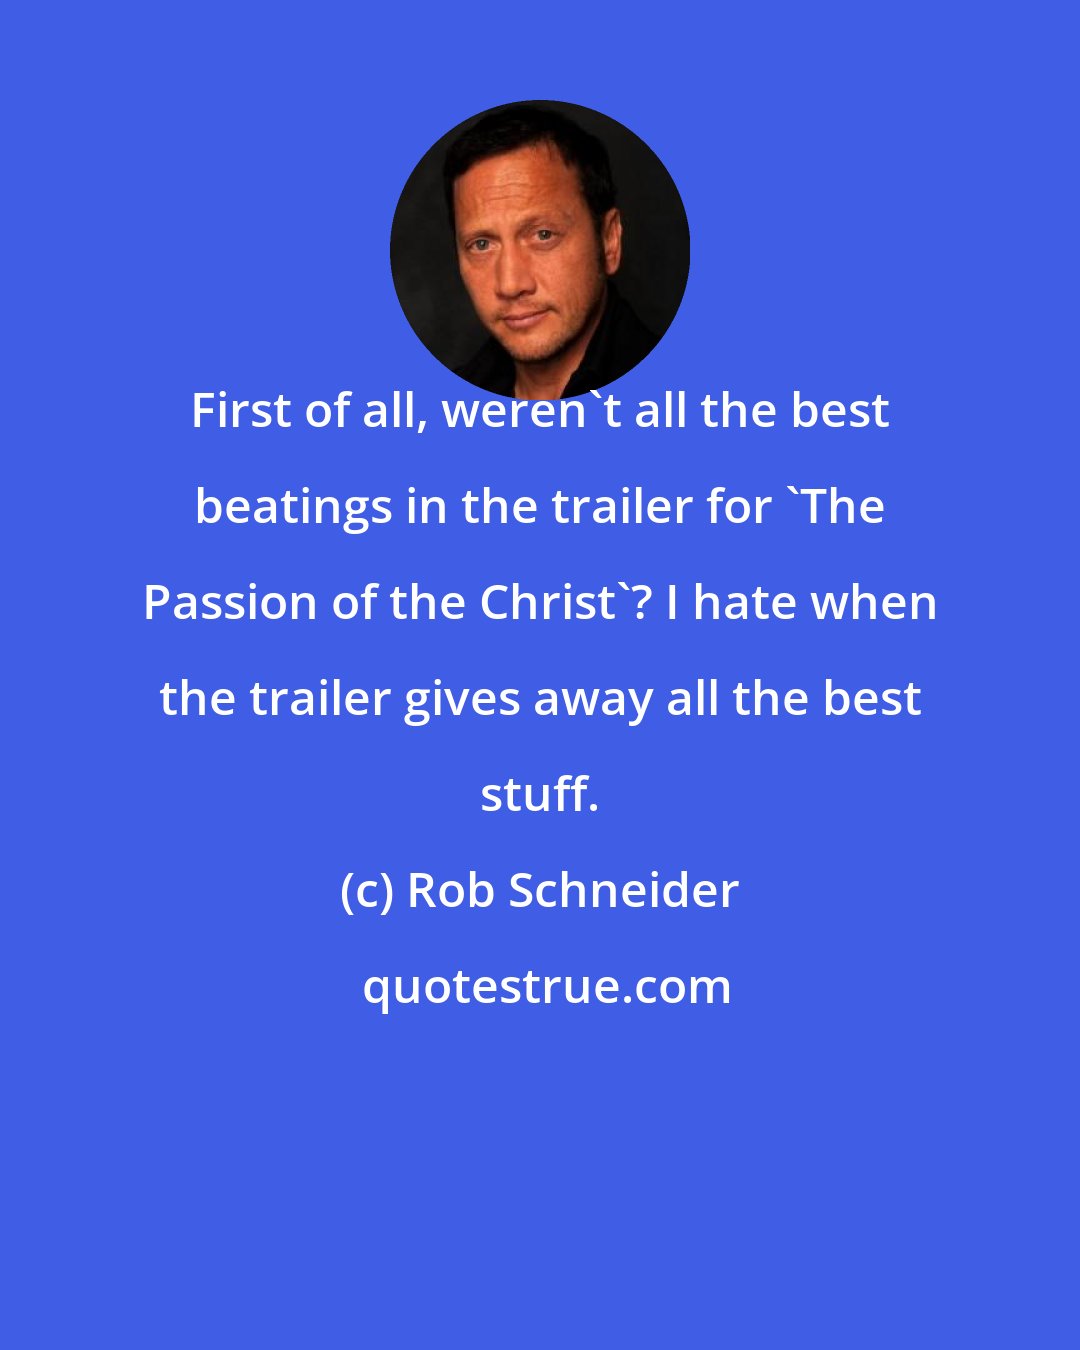 Rob Schneider: First of all, weren't all the best beatings in the trailer for 'The Passion of the Christ'? I hate when the trailer gives away all the best stuff.